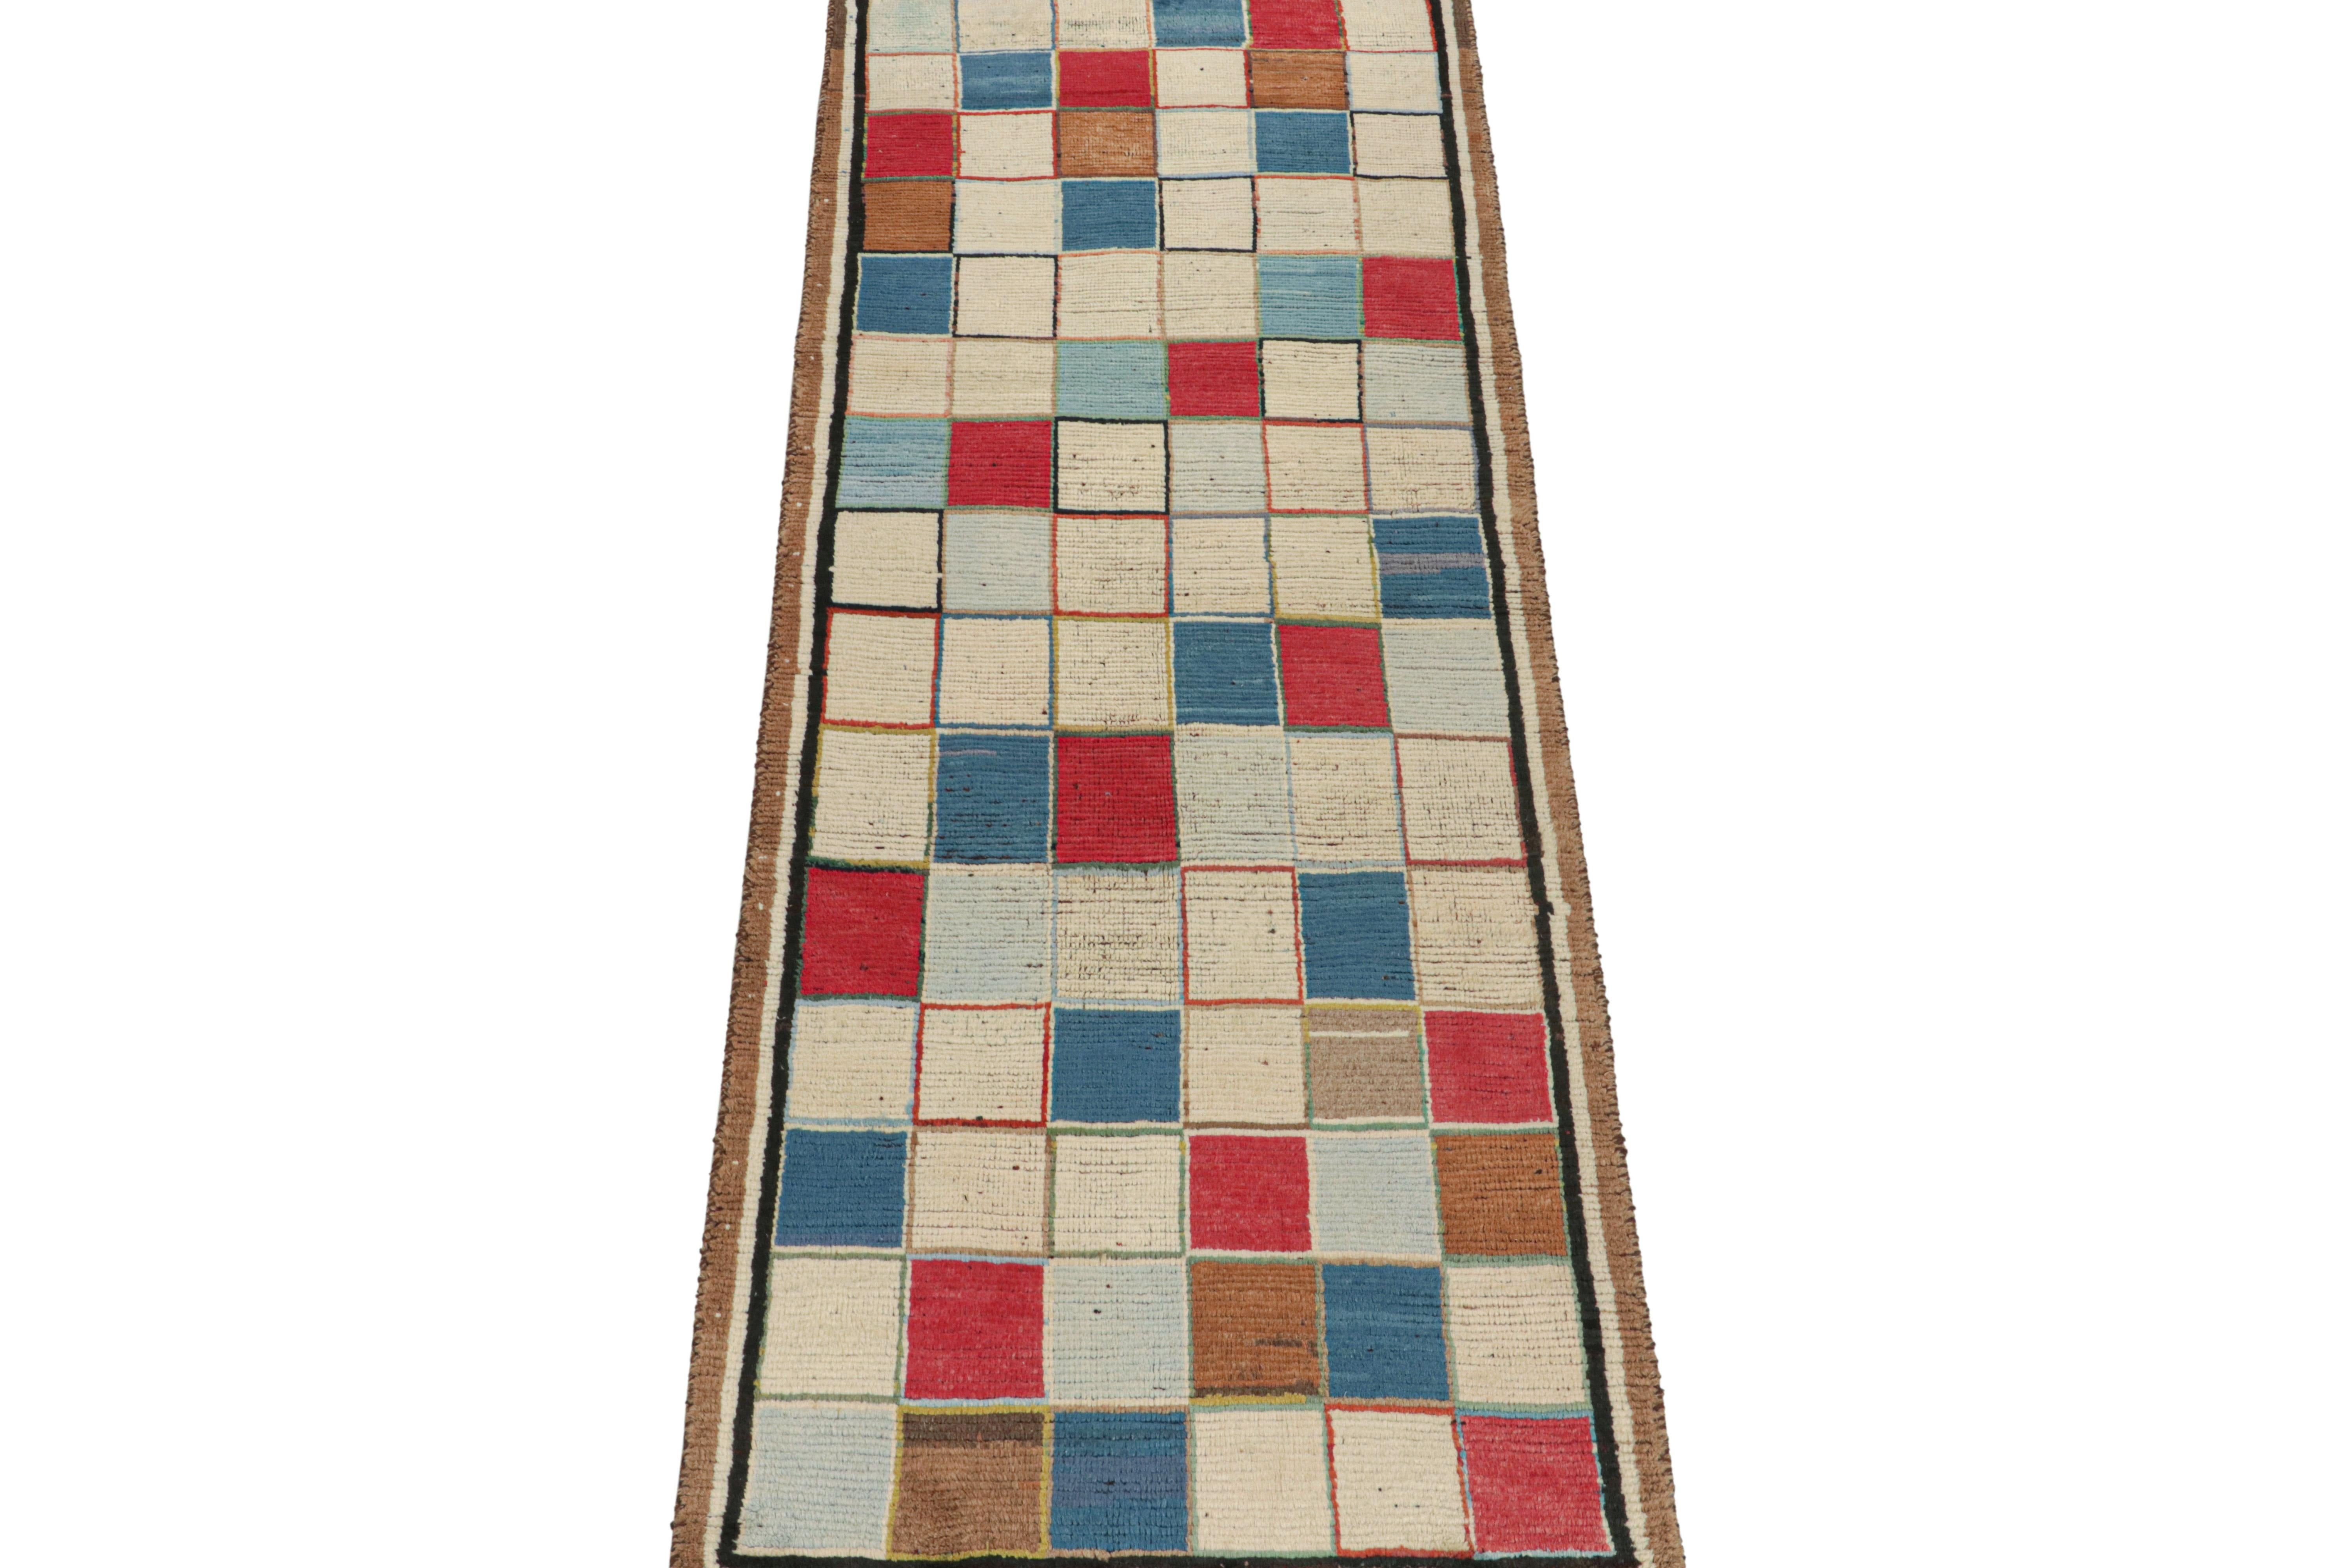 This vintage 3x9 Persian runner is a rare mid-century tribal rug, hand-knotted in wool circa 1950-1960.

Its design enjoys a series of square geometric patterns in off-white, brown, red, and blue hues. Connoisseurs will note how modern this piece